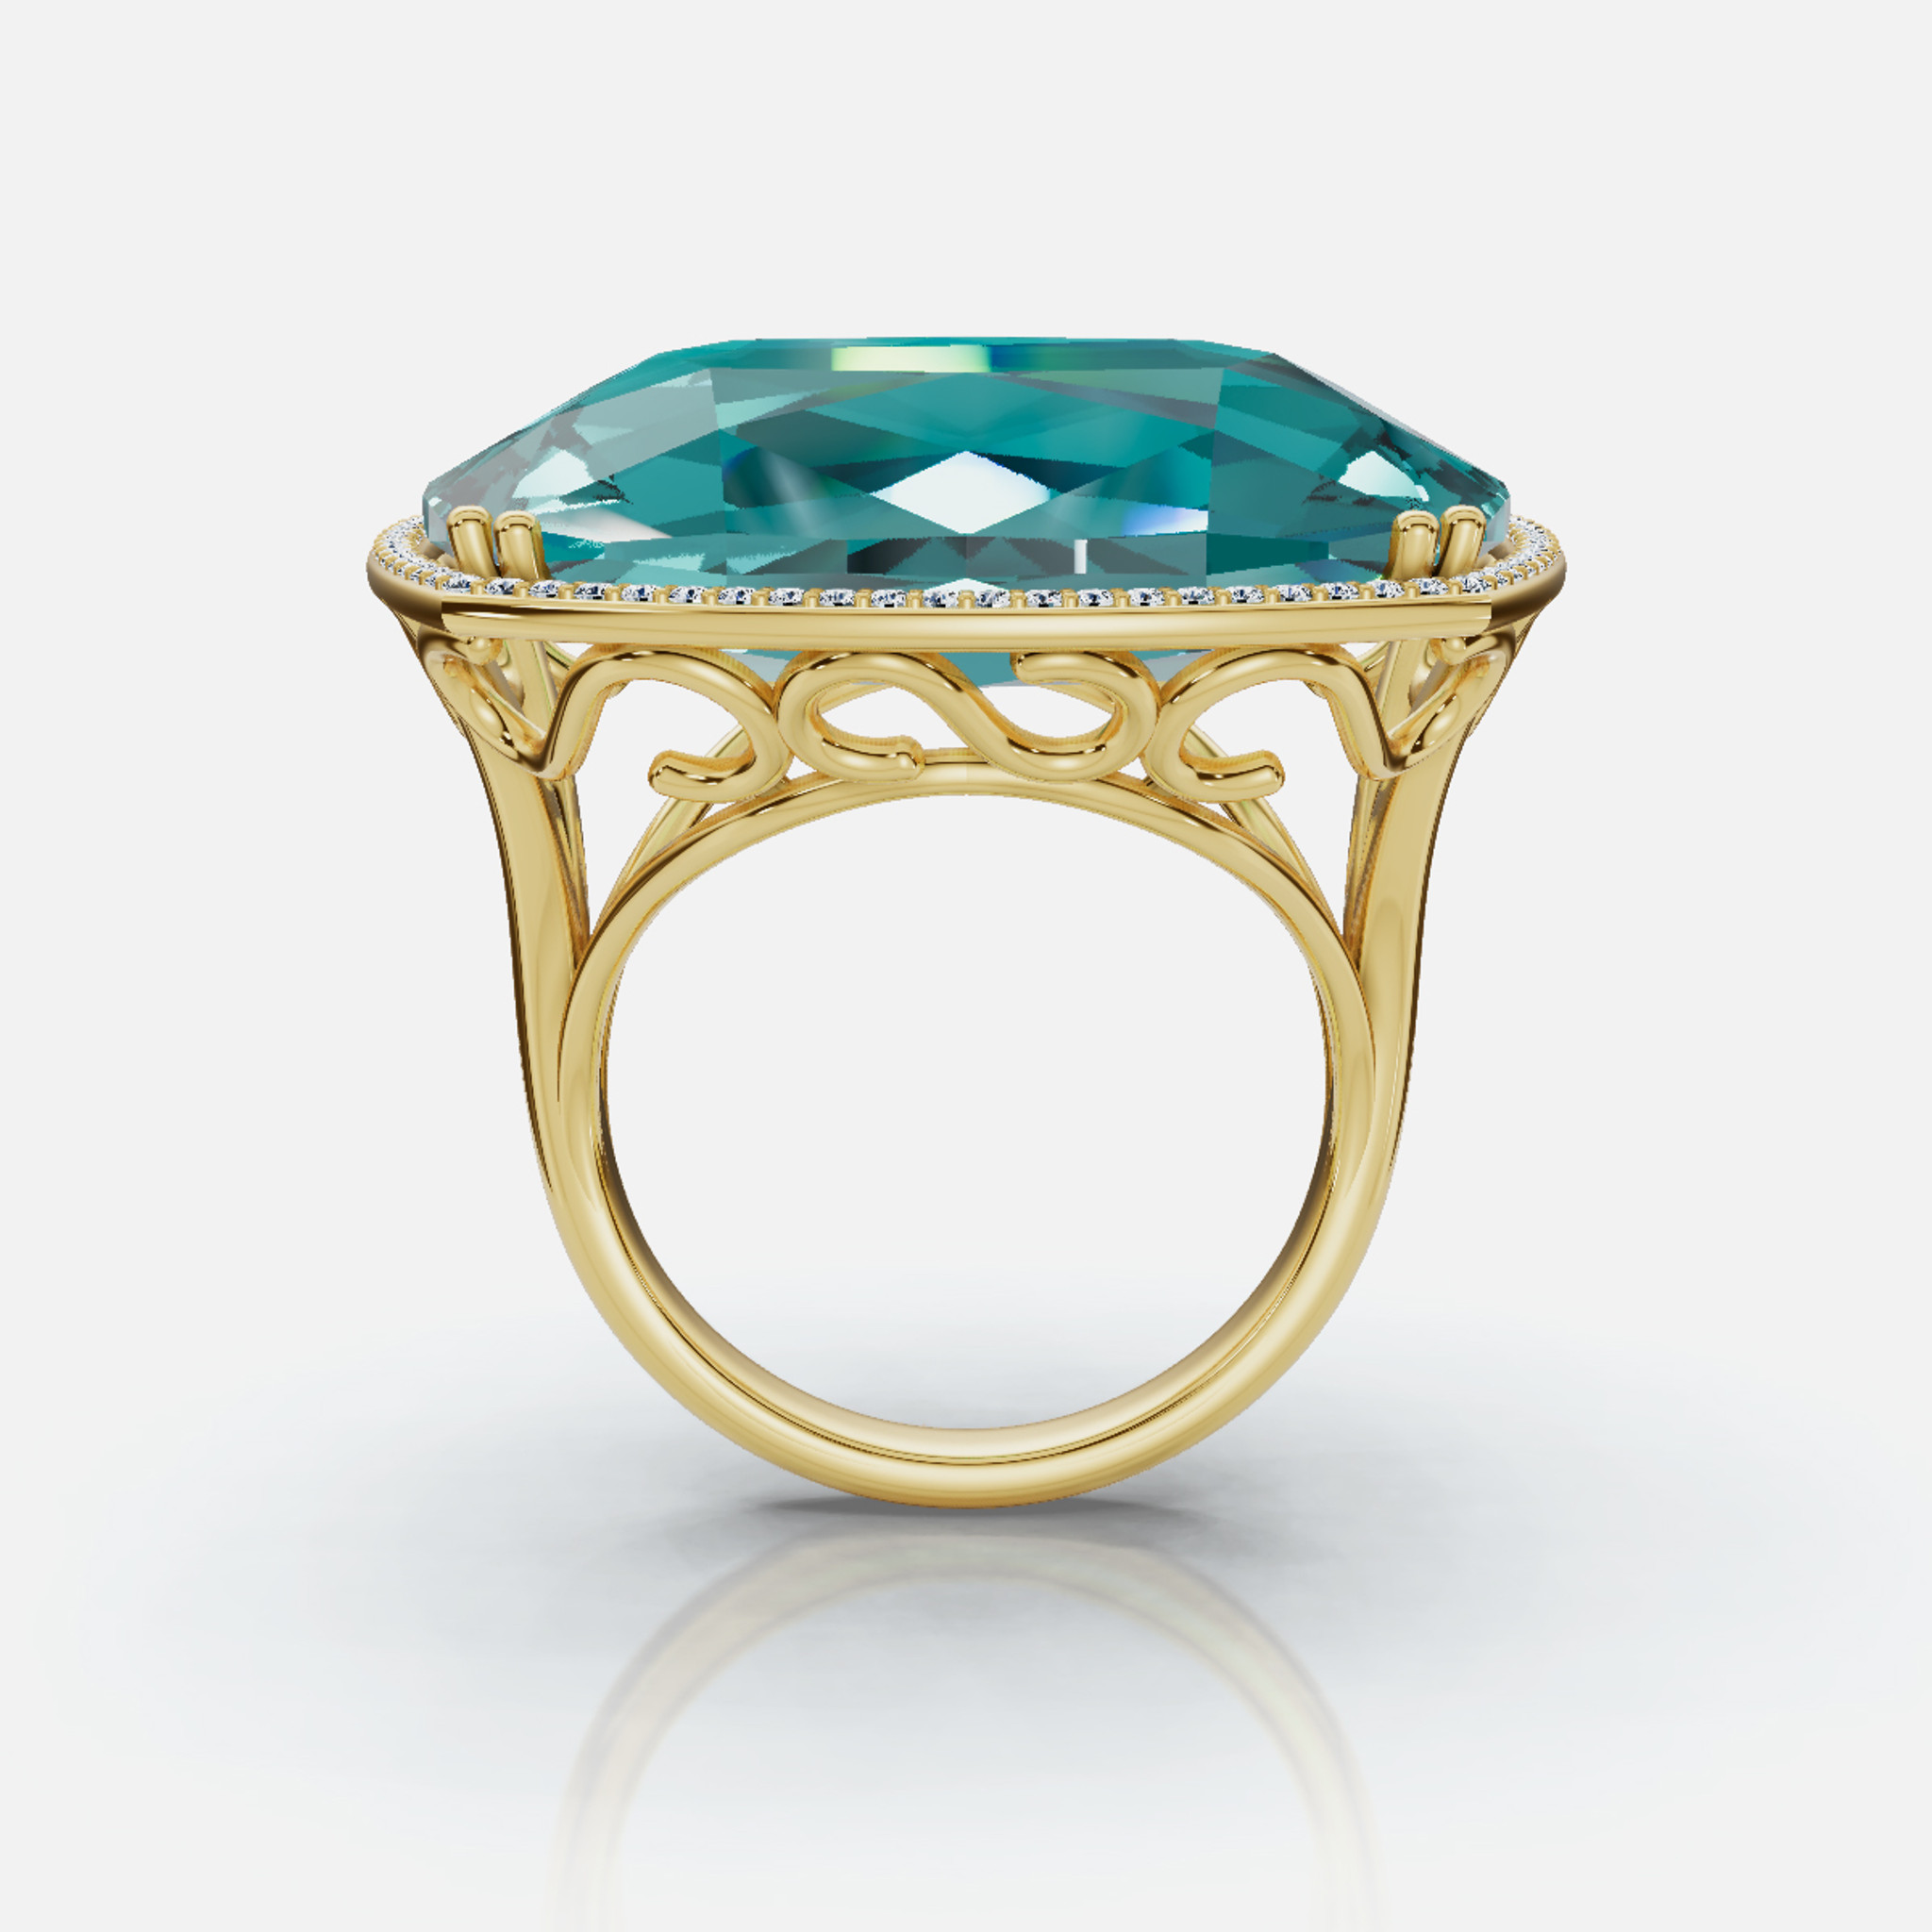 Frontal perspective of the 14K Gold Diamond Blue Topaz Statement Ring